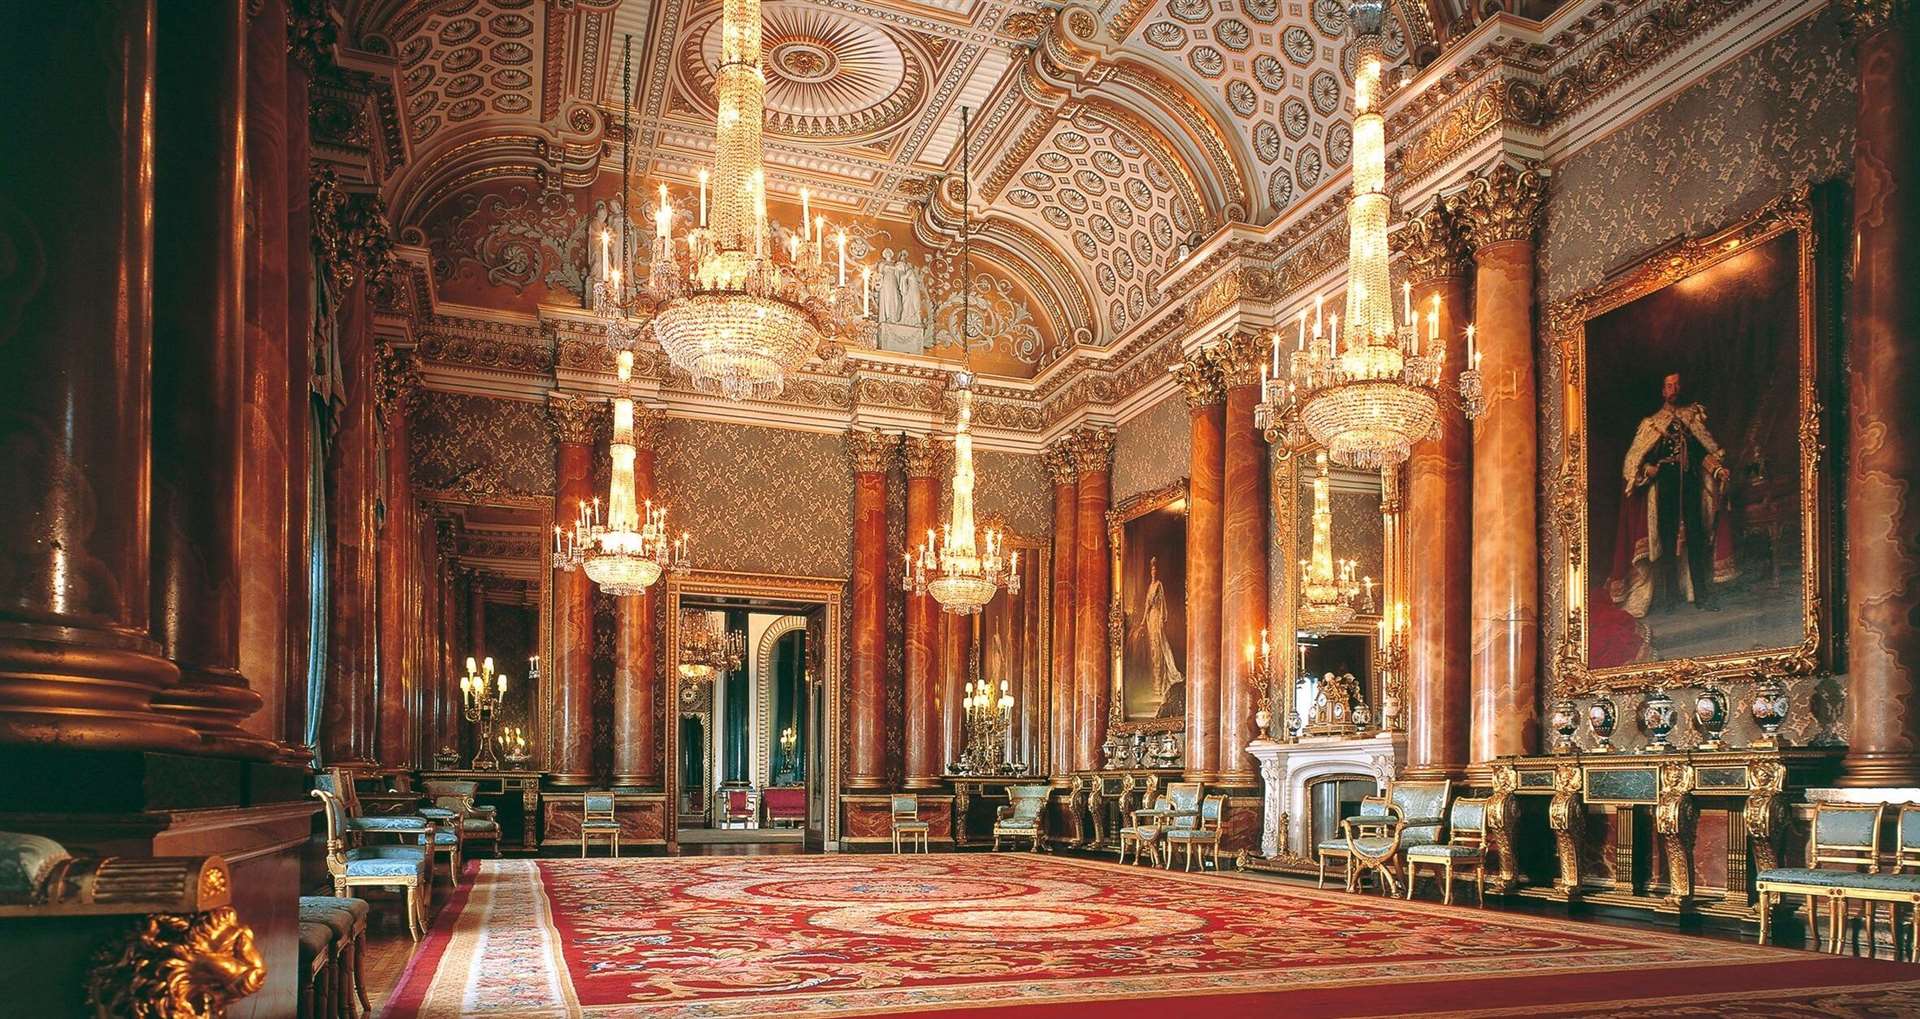 The State Rooms at the heart of Buckingham Palace provide the setting for ceremonial occasions and official entertaining.